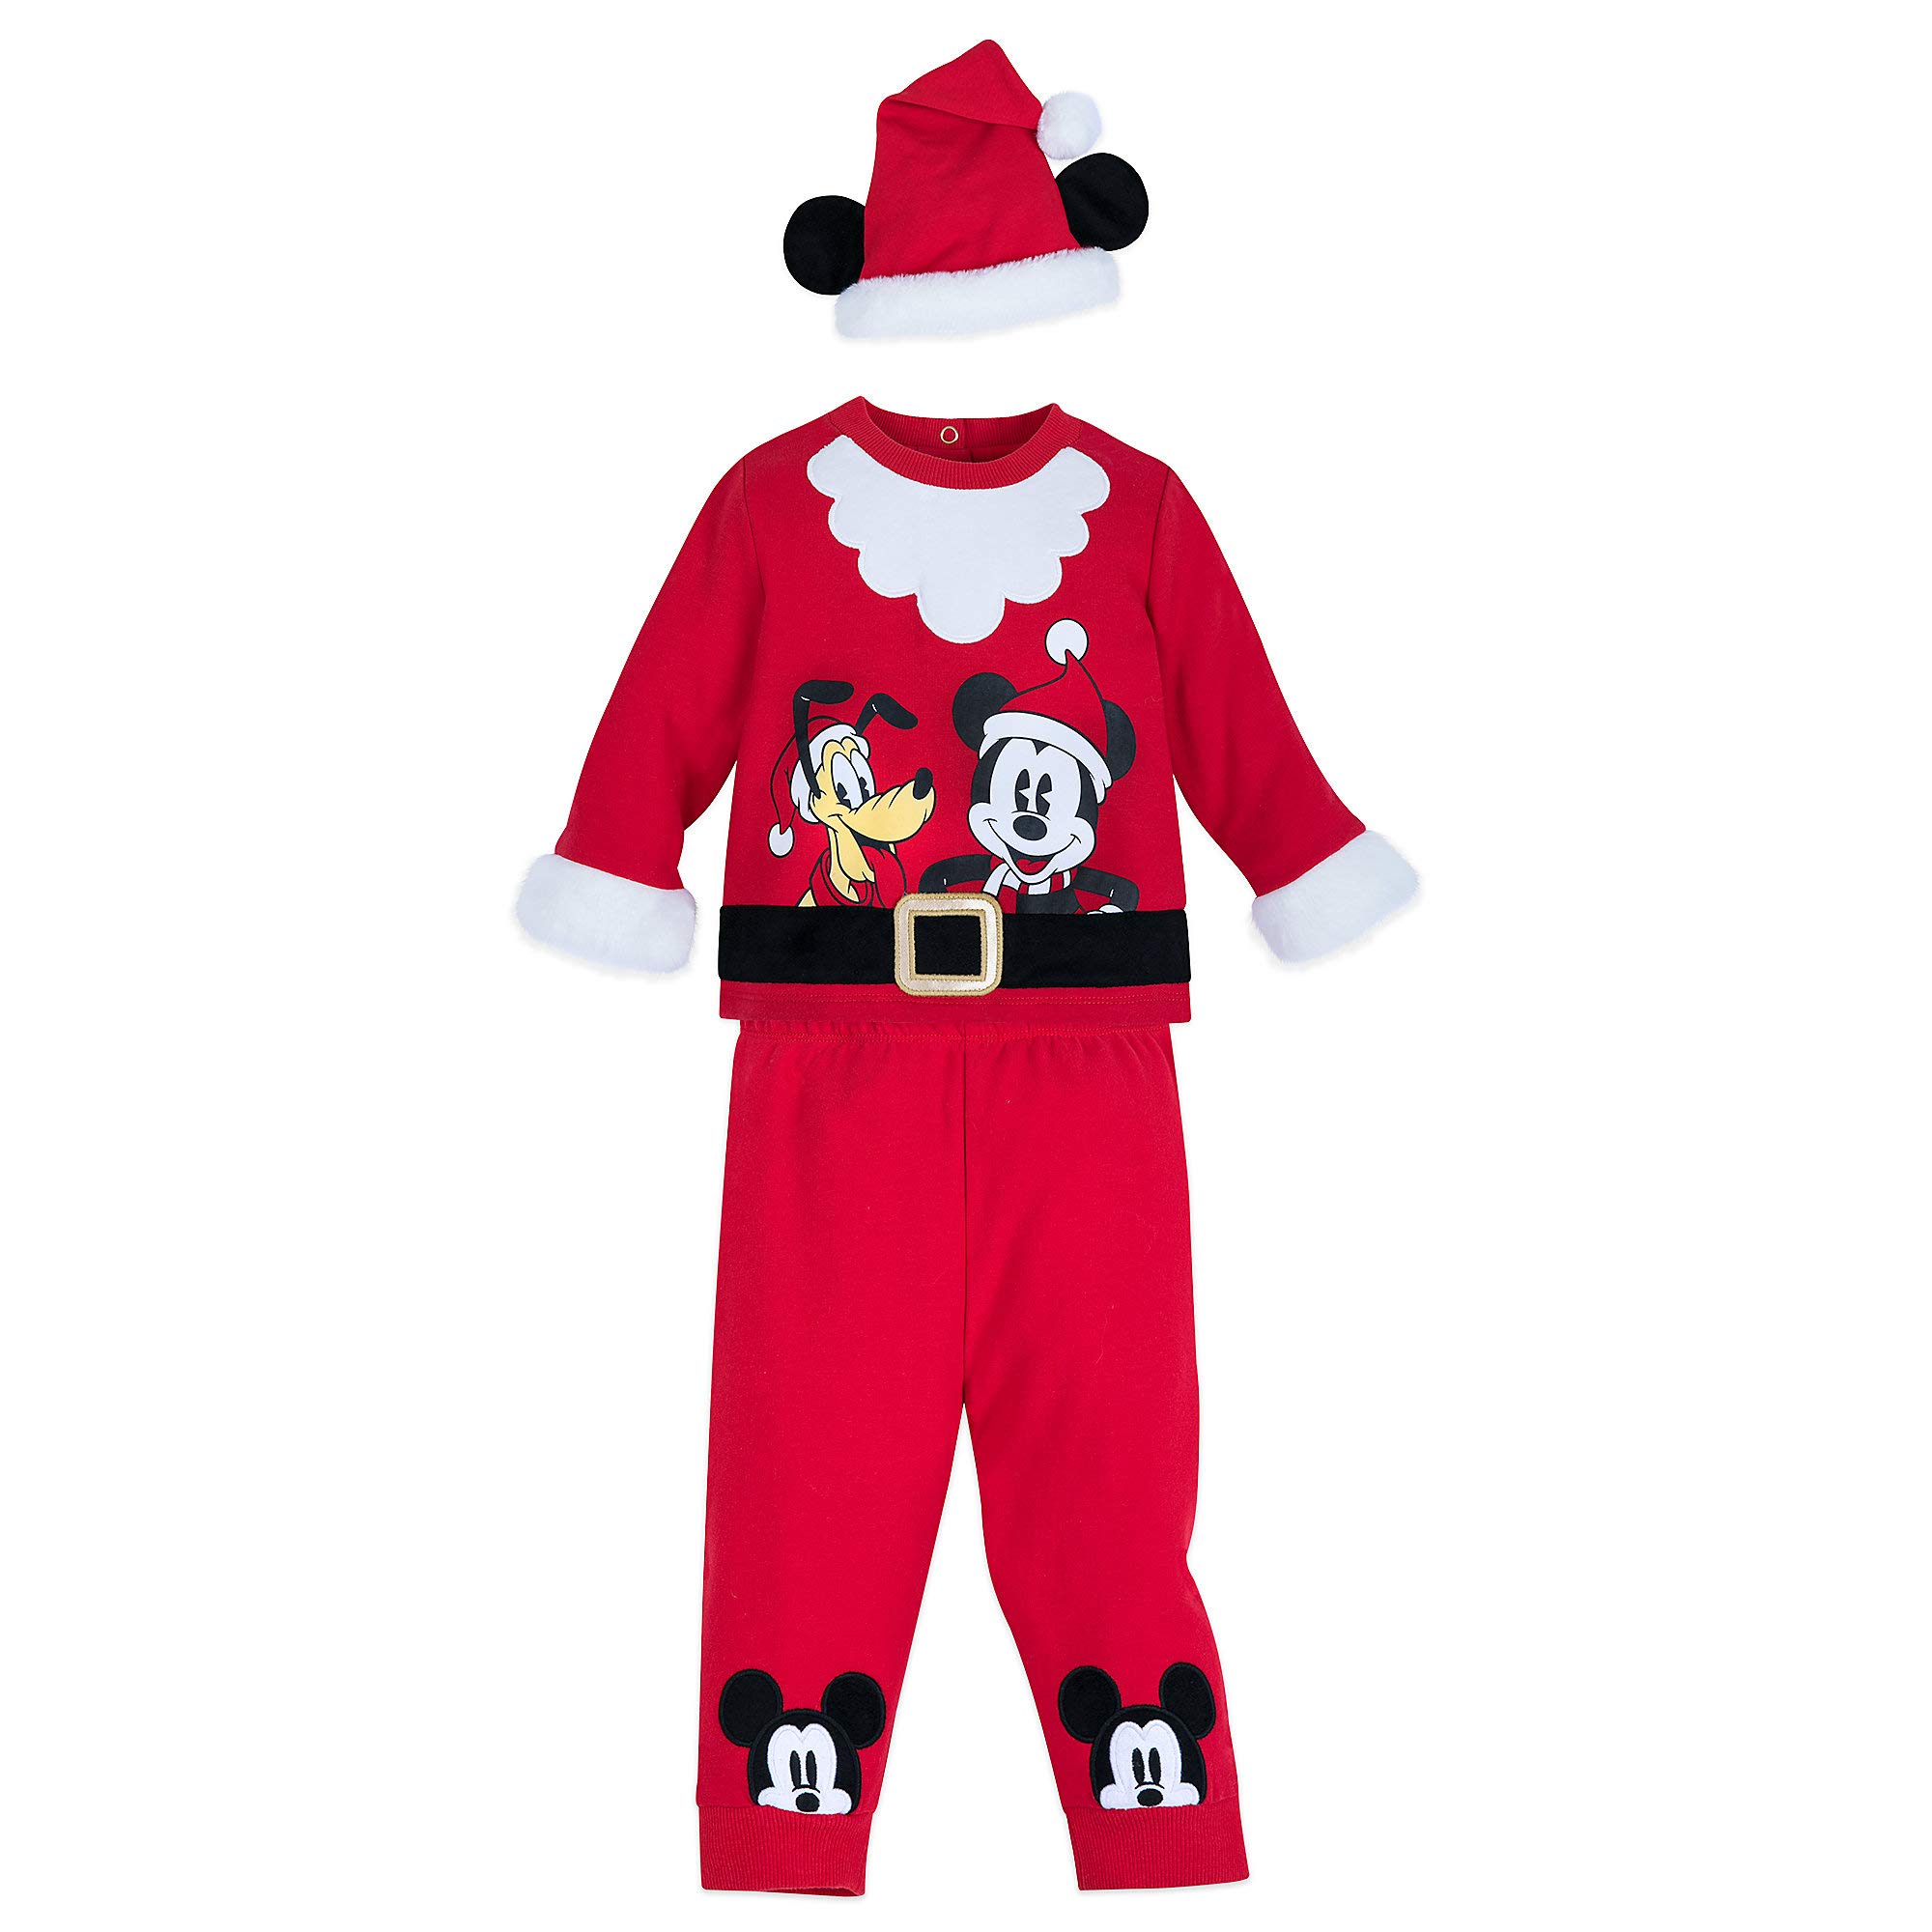 Disney Mickey Mouse and Pluto Santa Suit Set for Baby Size 18-24 MO Multi